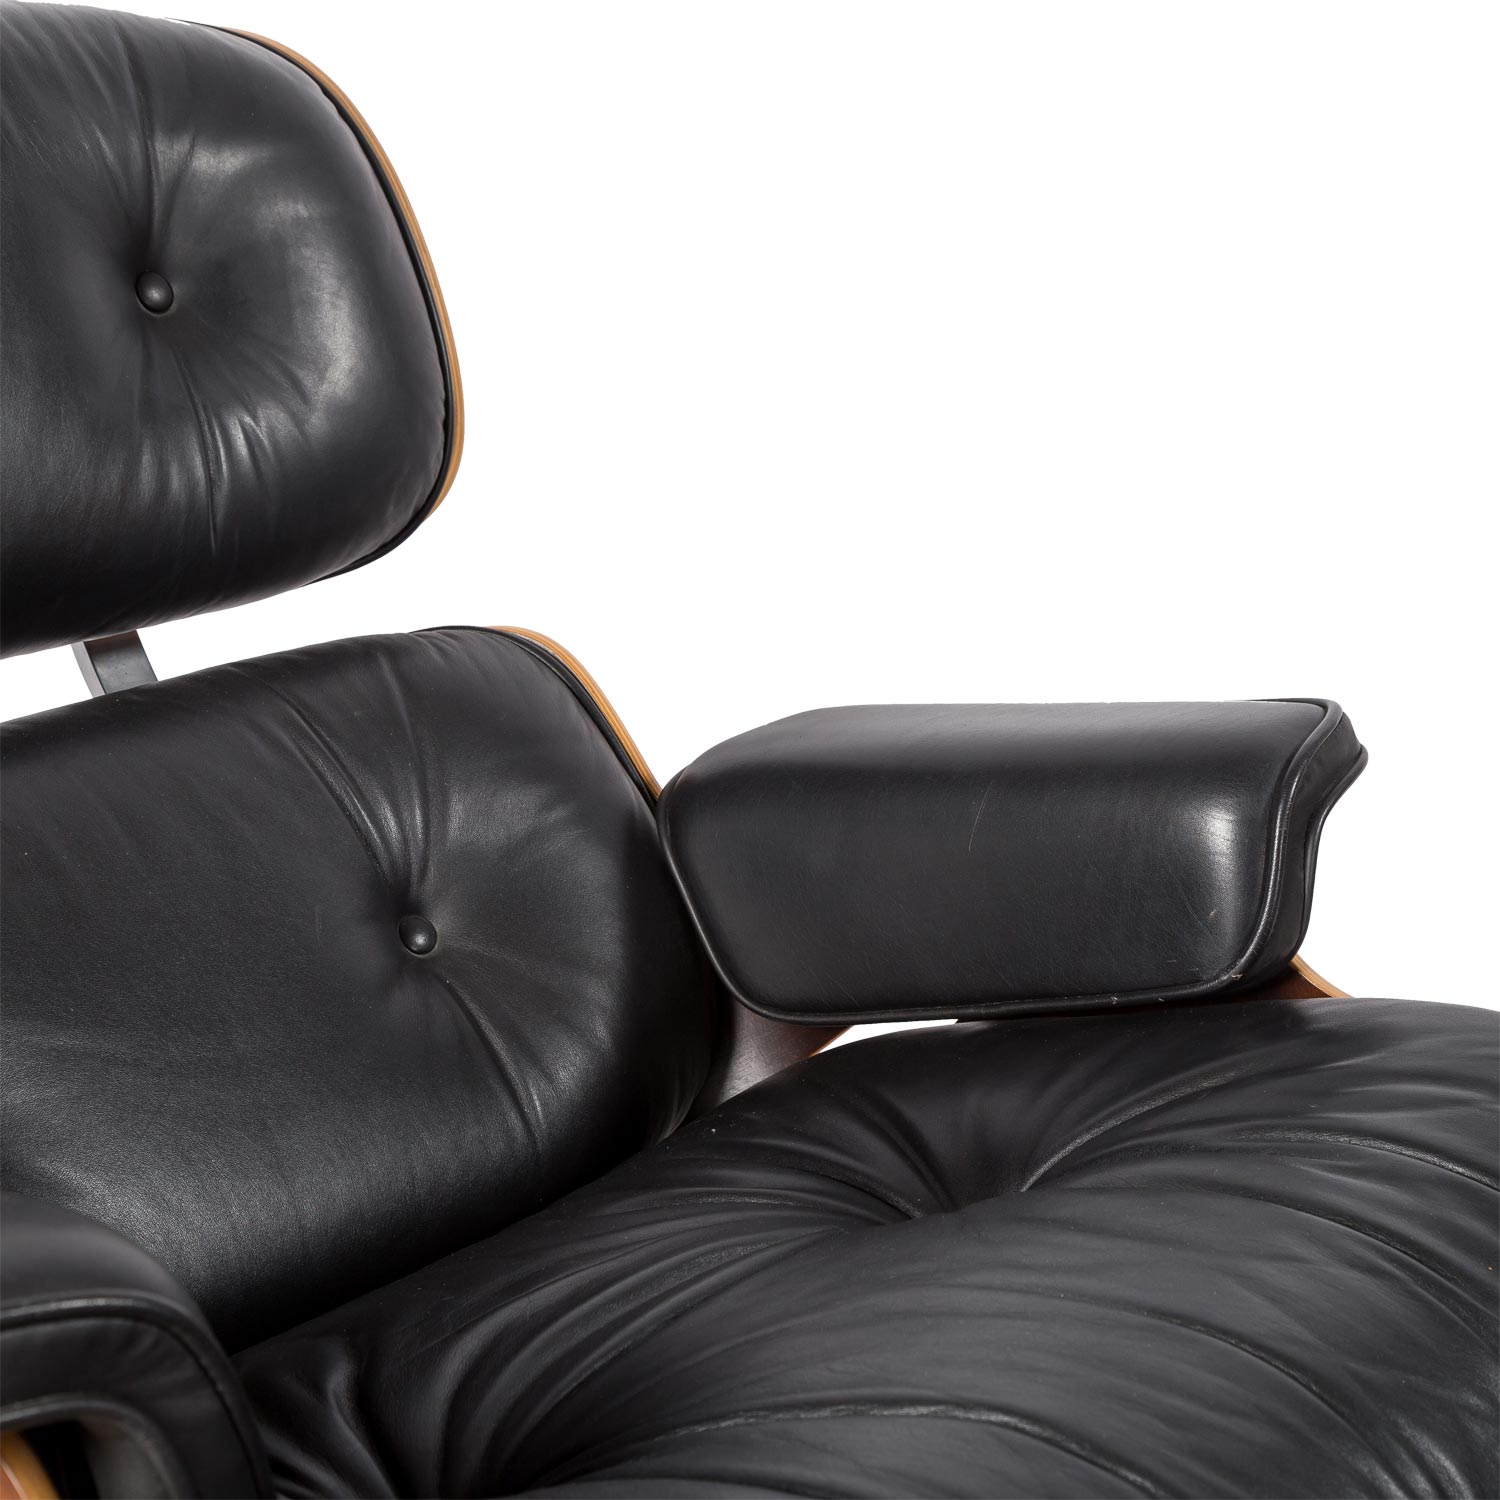 RAY & CHARLES EAMES "Lounge Chair mit Ottomane" - Image 2 of 8